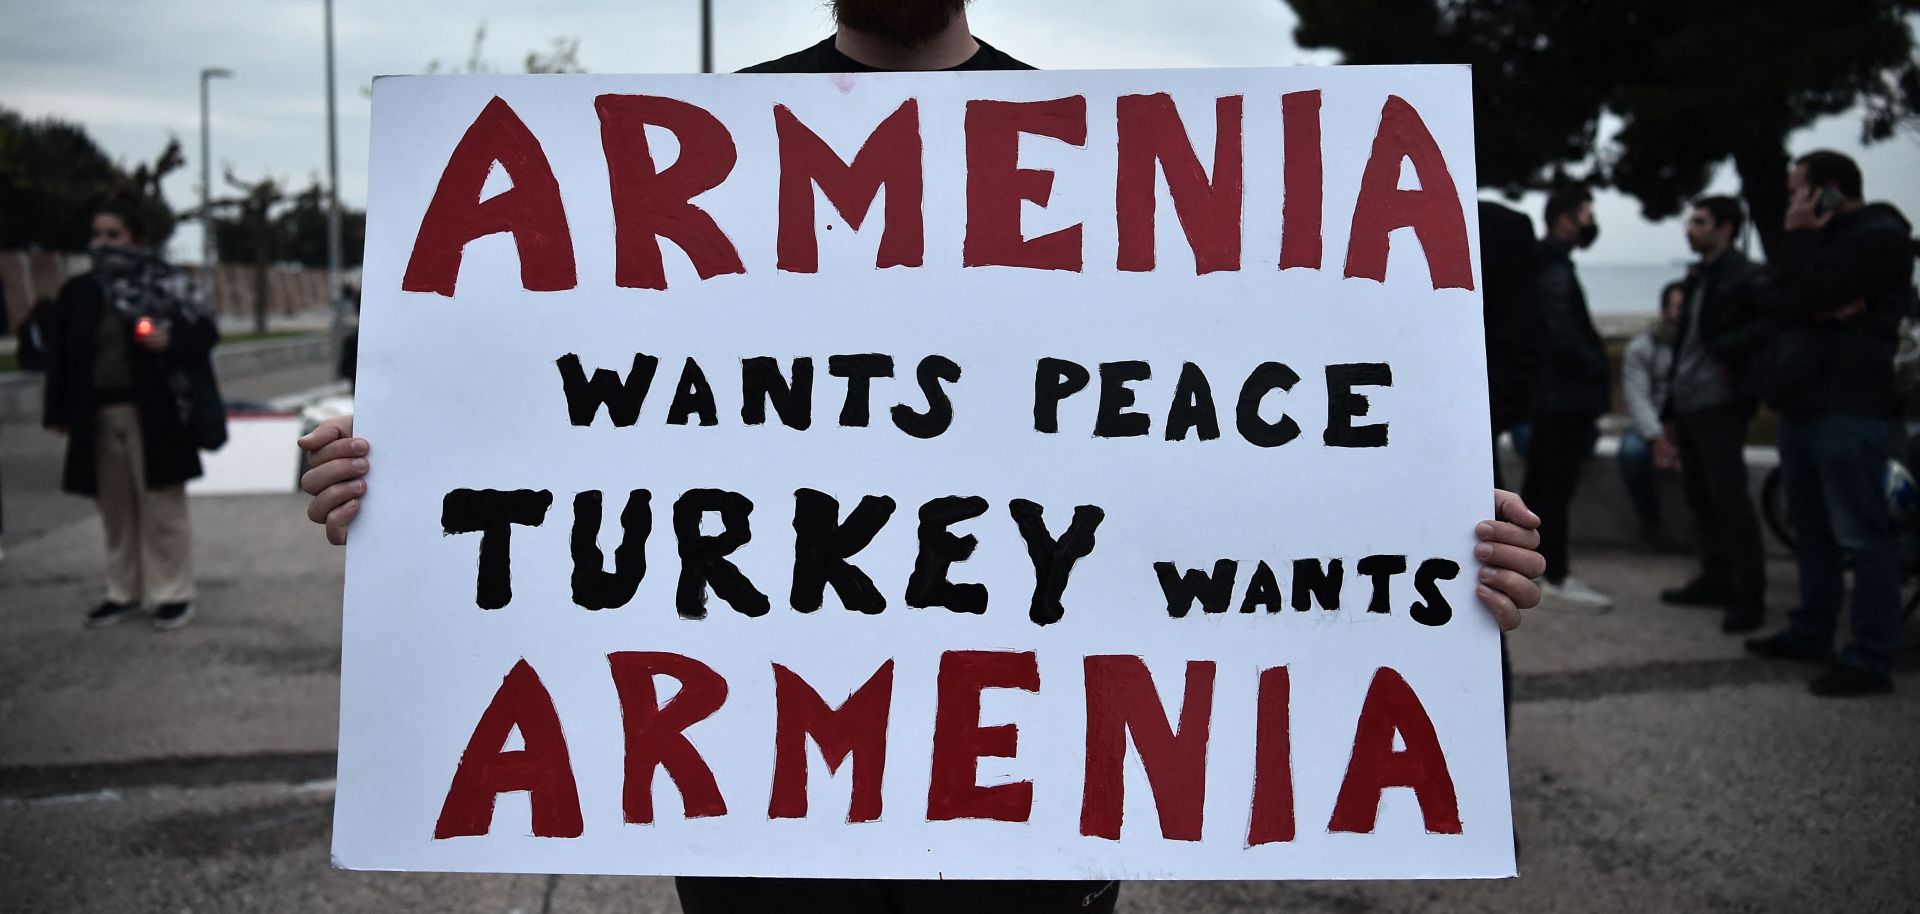 A demonstrator holds a placard during a rally in Thessaloniki, northern Greece on April 24, 2021, to commemorate the 106th anniversary of the Armenian genocide. 